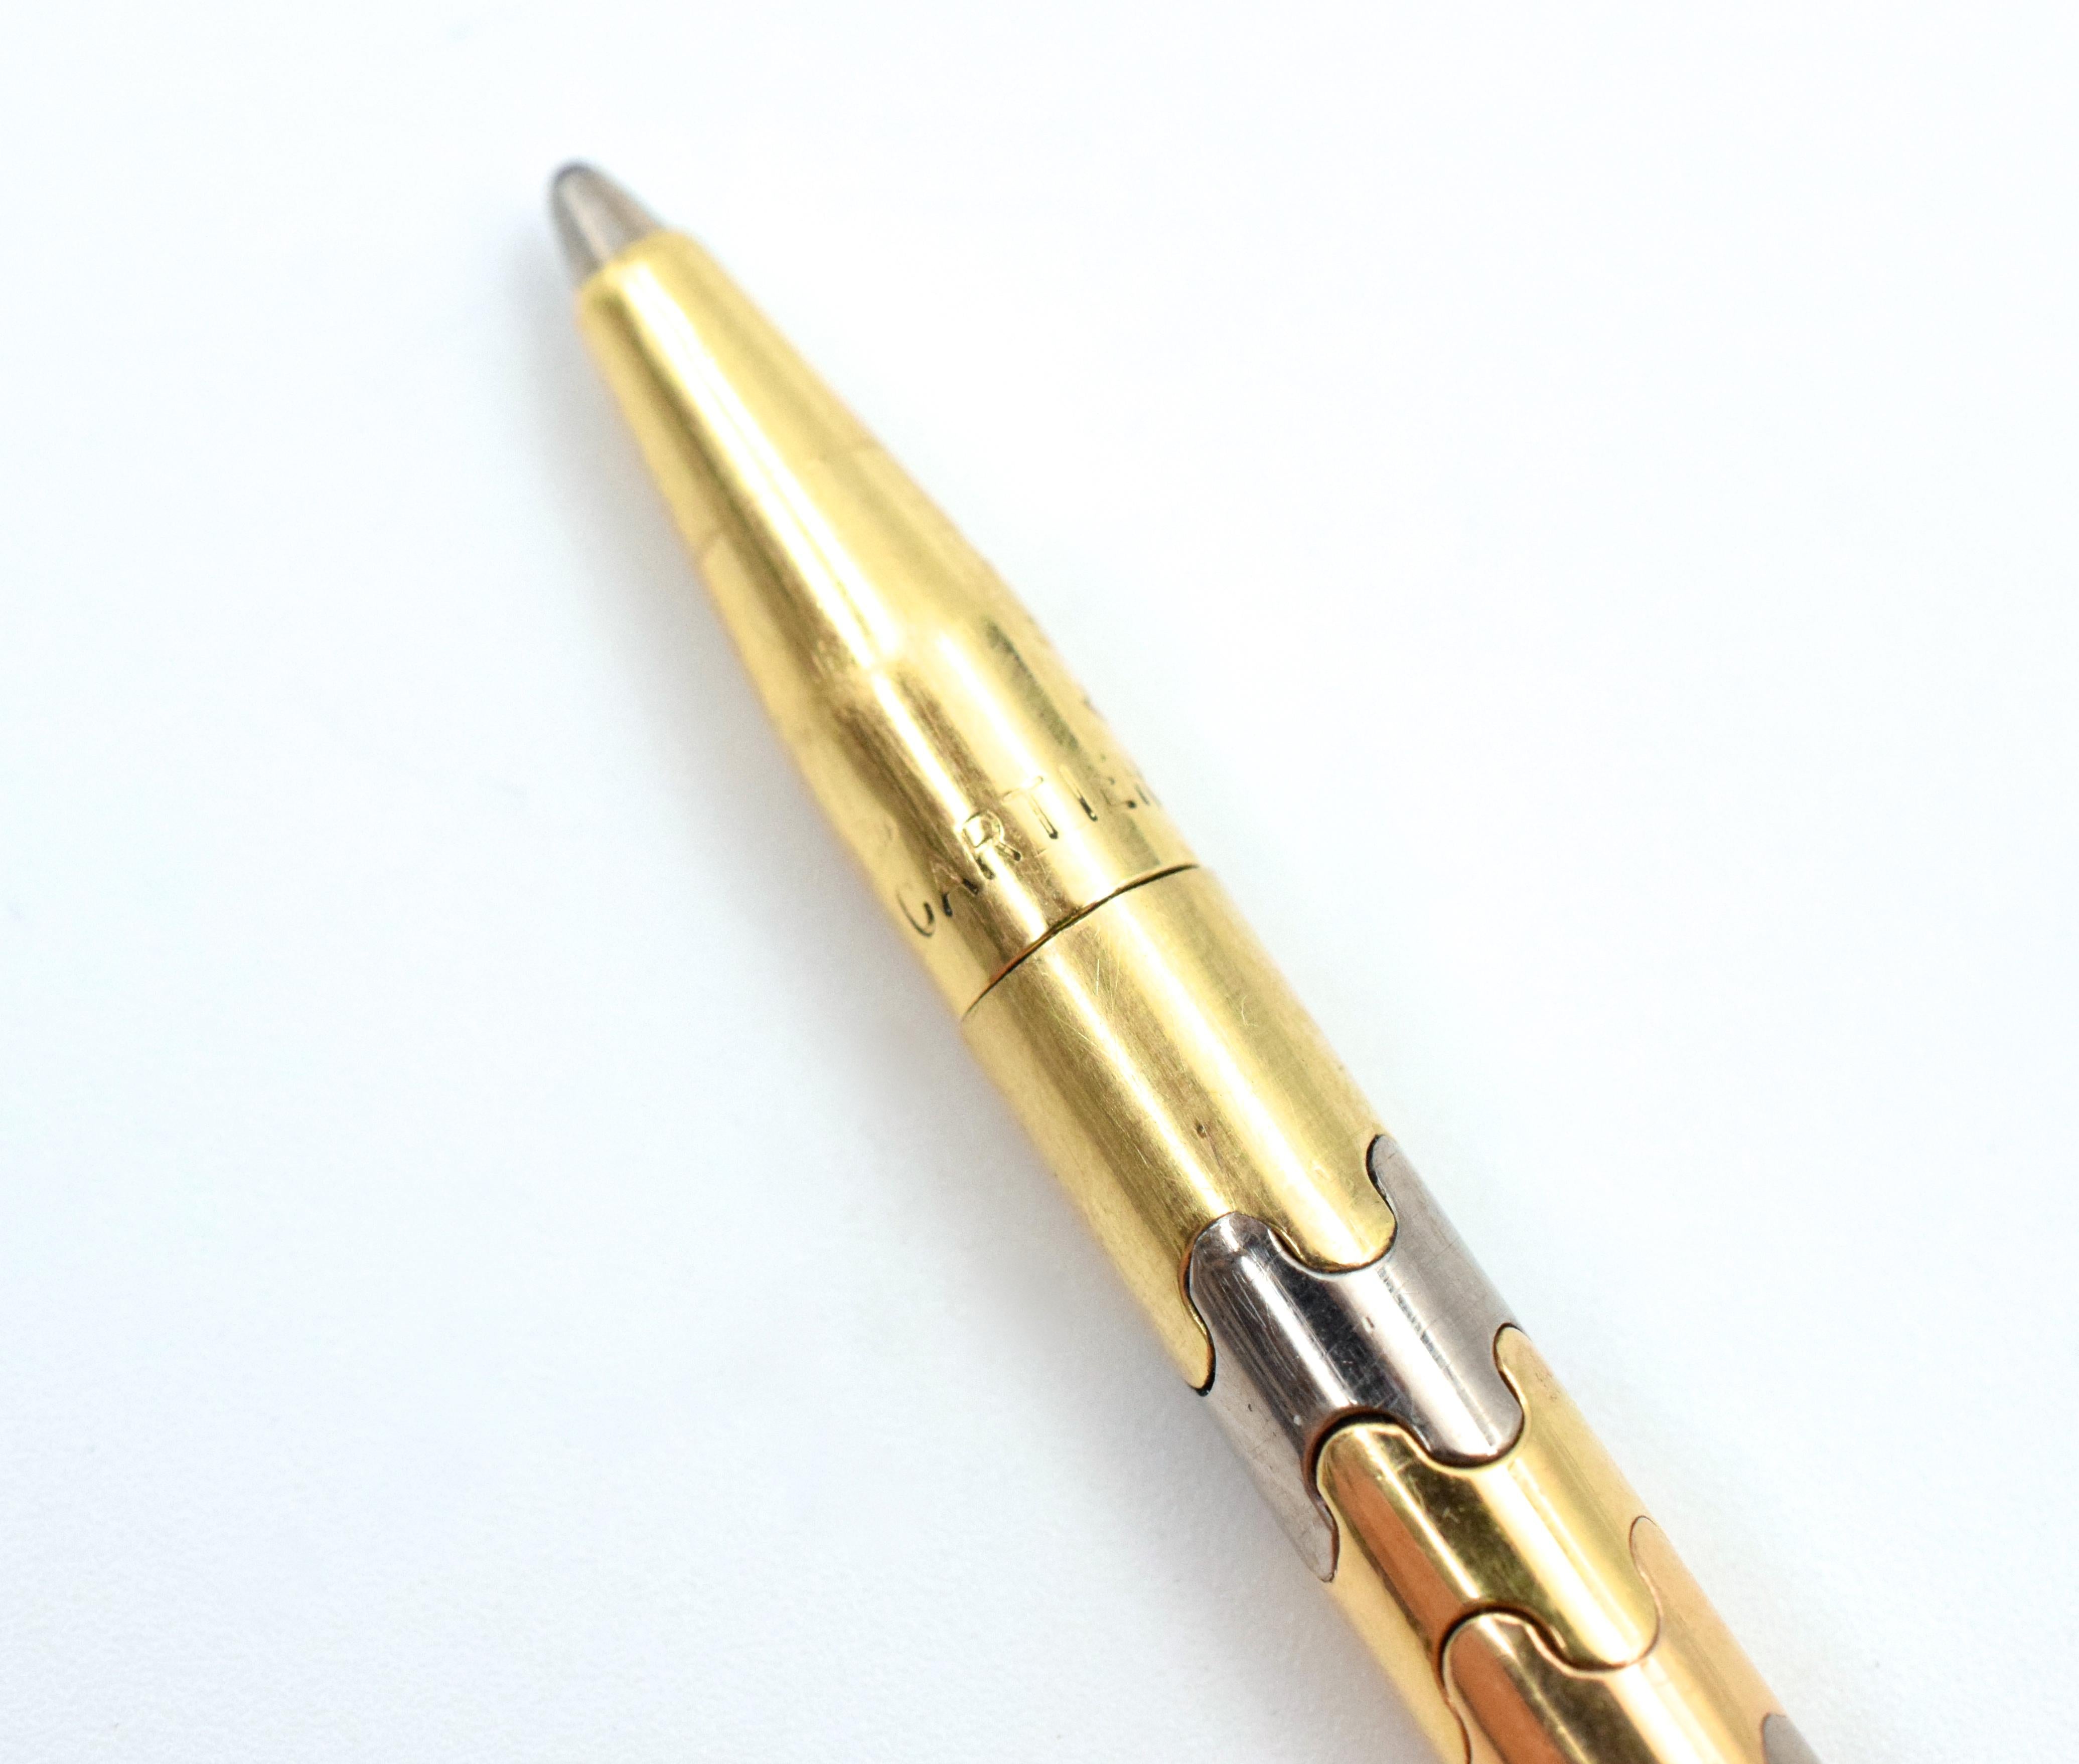 Unusual  pen - pendant by Cartier
Circa 1960 - 1970
 Made in 18k gold and steel.
 Weight 11.50g.
